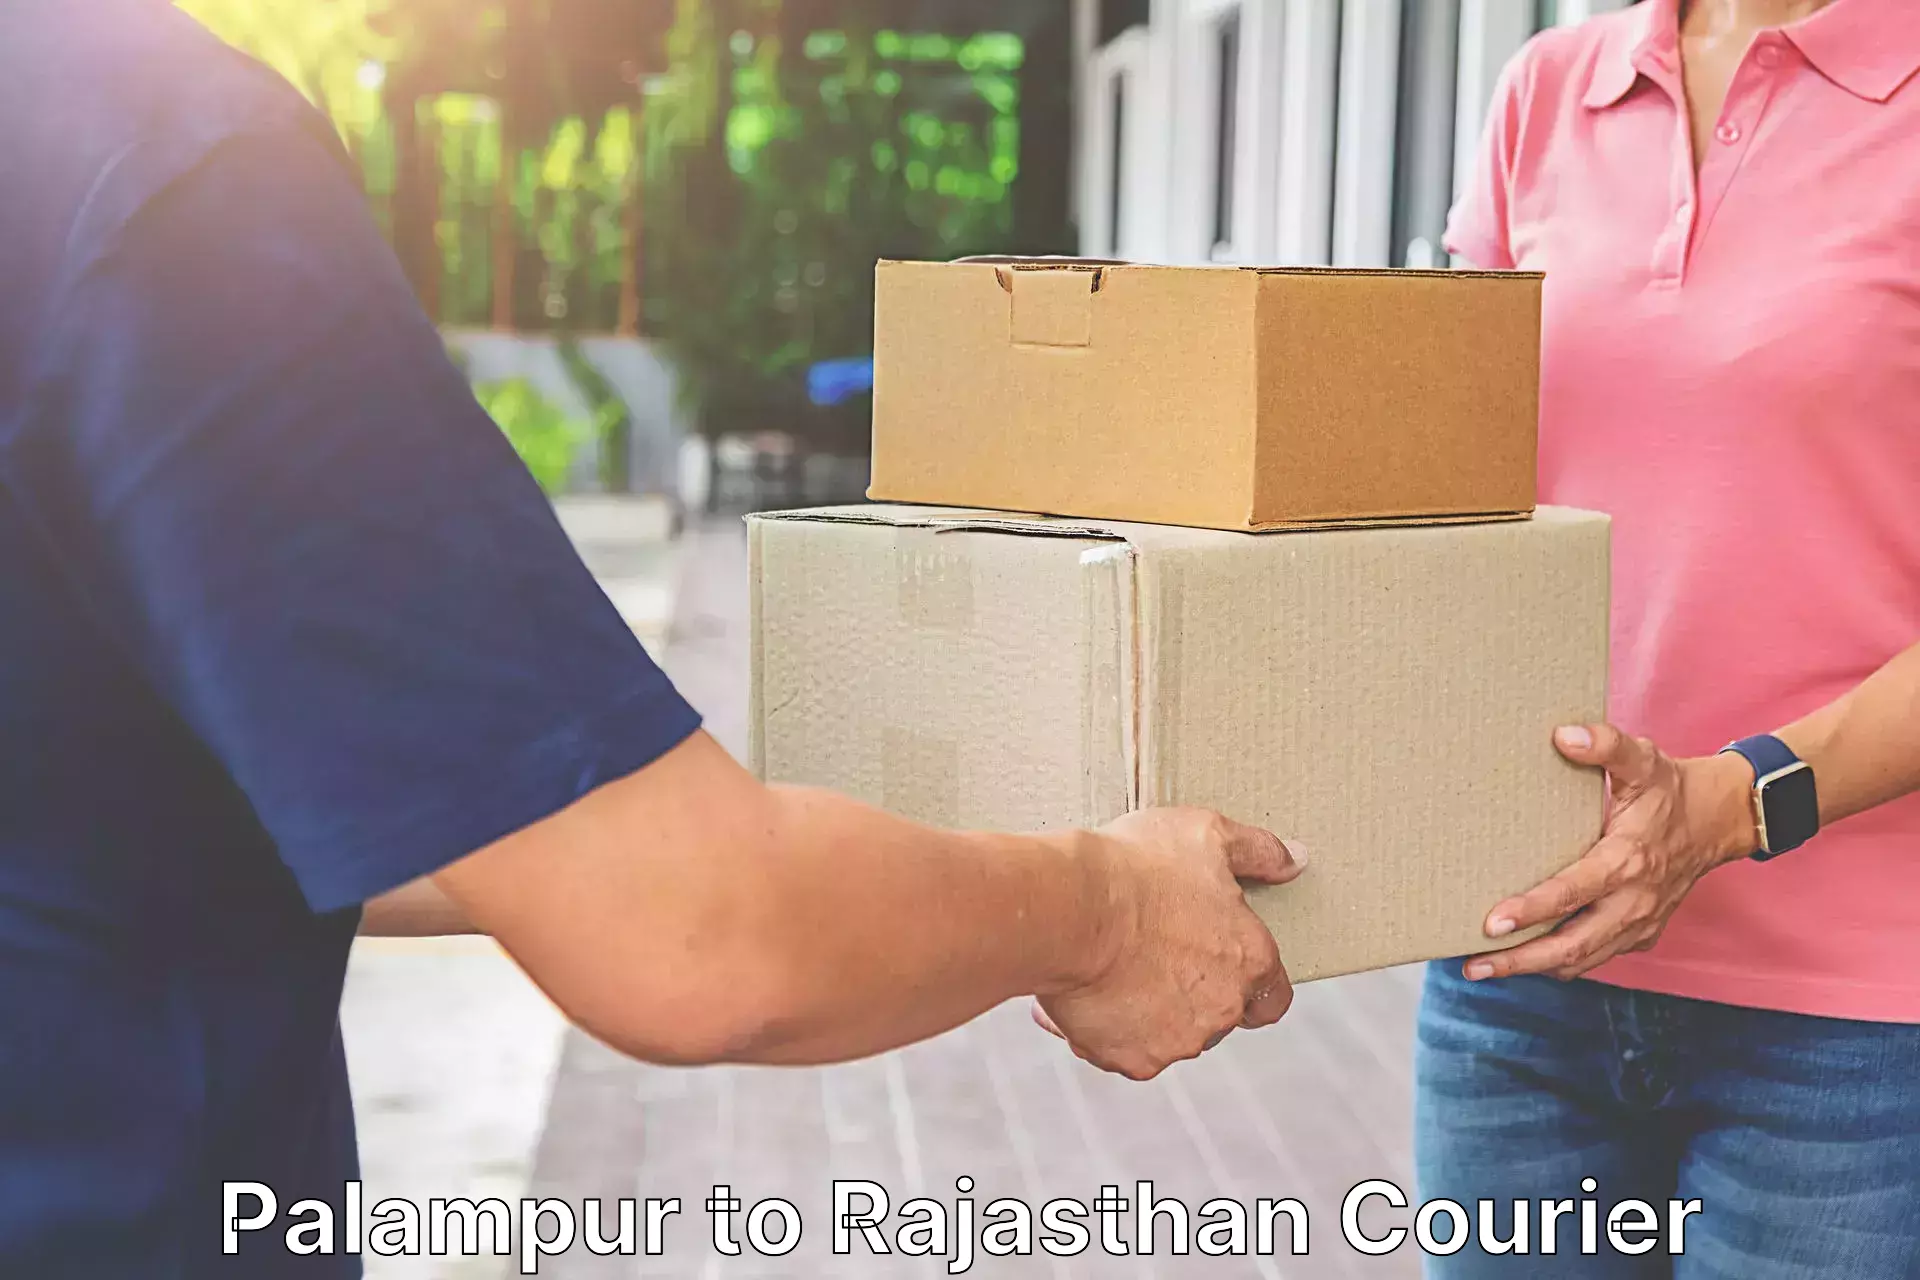 Multi-national courier services Palampur to Phulera